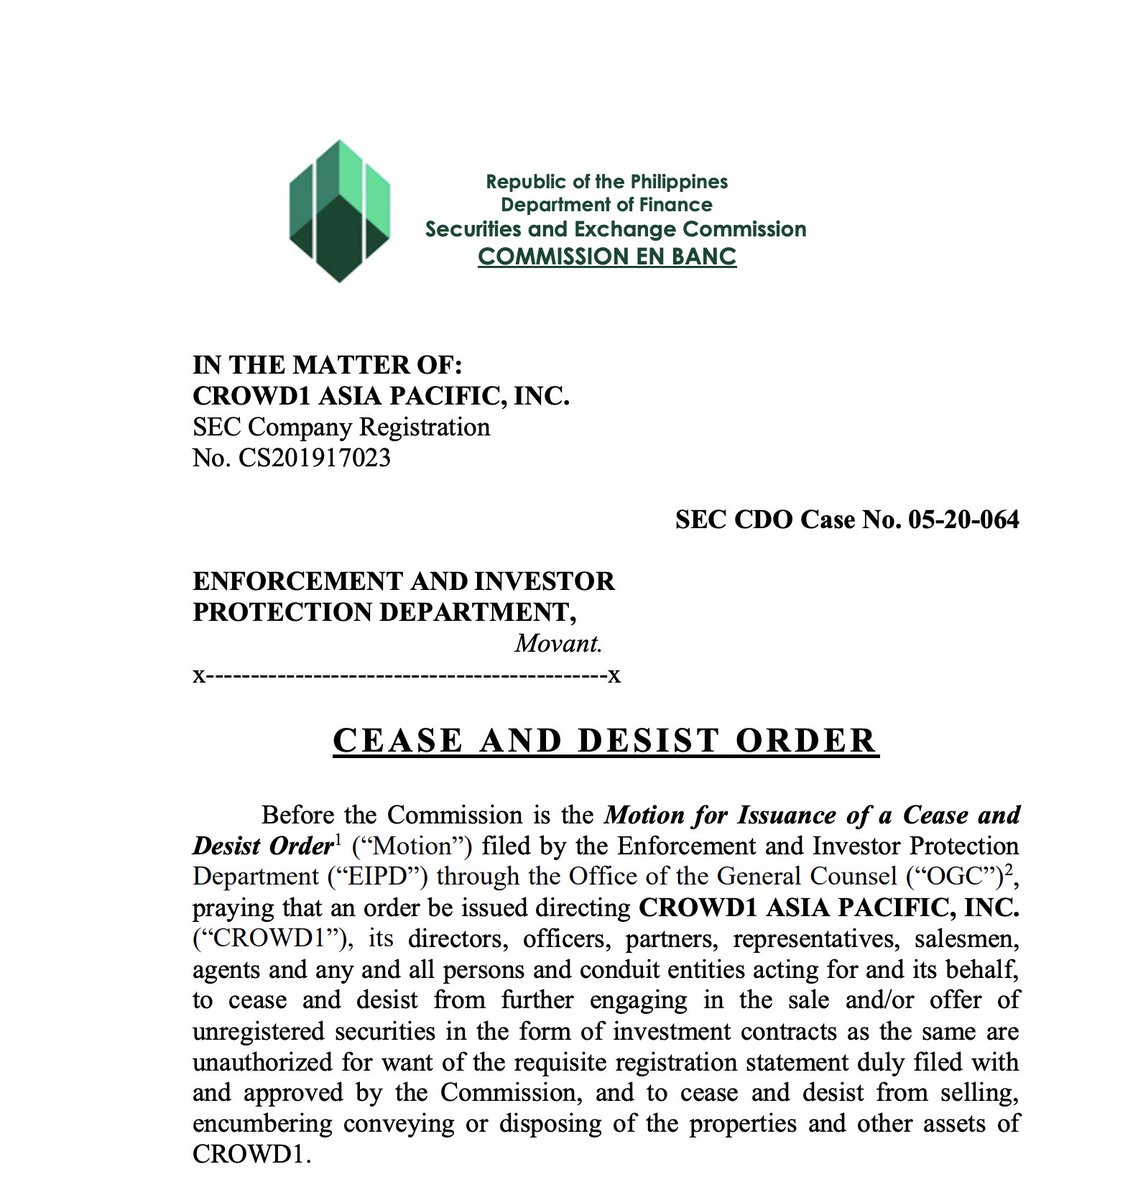 Now we're in May 2020 and the Securities and Exchange Commission of the Philippines issues a Cease and Desist Order (CDO) against the Asian branch of Crowd1. Crowd1 tried to fight it, but it was made permanent in July.Docs:-  https://www.sec.gov.ph/wp-content/uploads/2020/05/2020CDO_Case-No.-05-20-064-Crowd1-CDO.pdf-  https://www.sec.gov.ph/wp-content/uploads/2020/07/2020Resolution_CROWD1.pdf